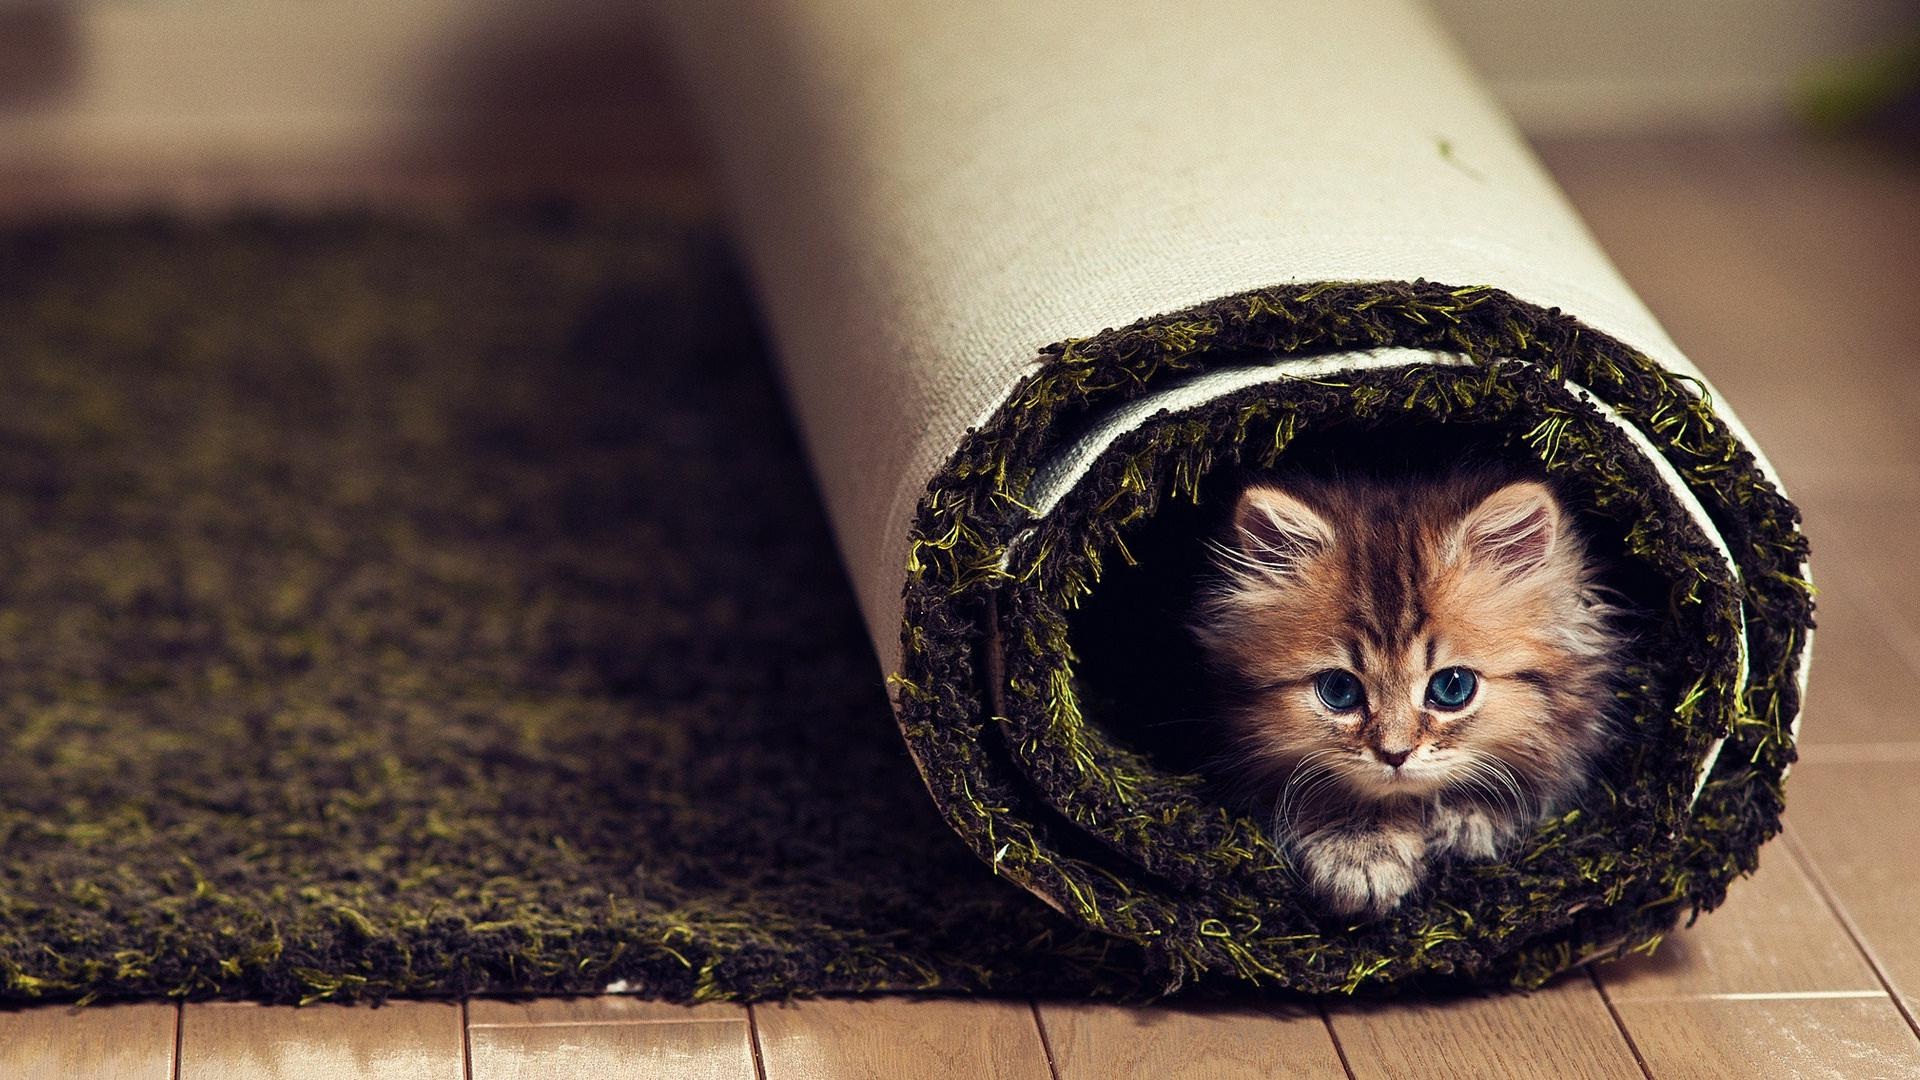 animals, Cats, Kittens, Cute, Fir, Face, Whiskers, Eyes, Carpet, Humor, Funny Wallpaper